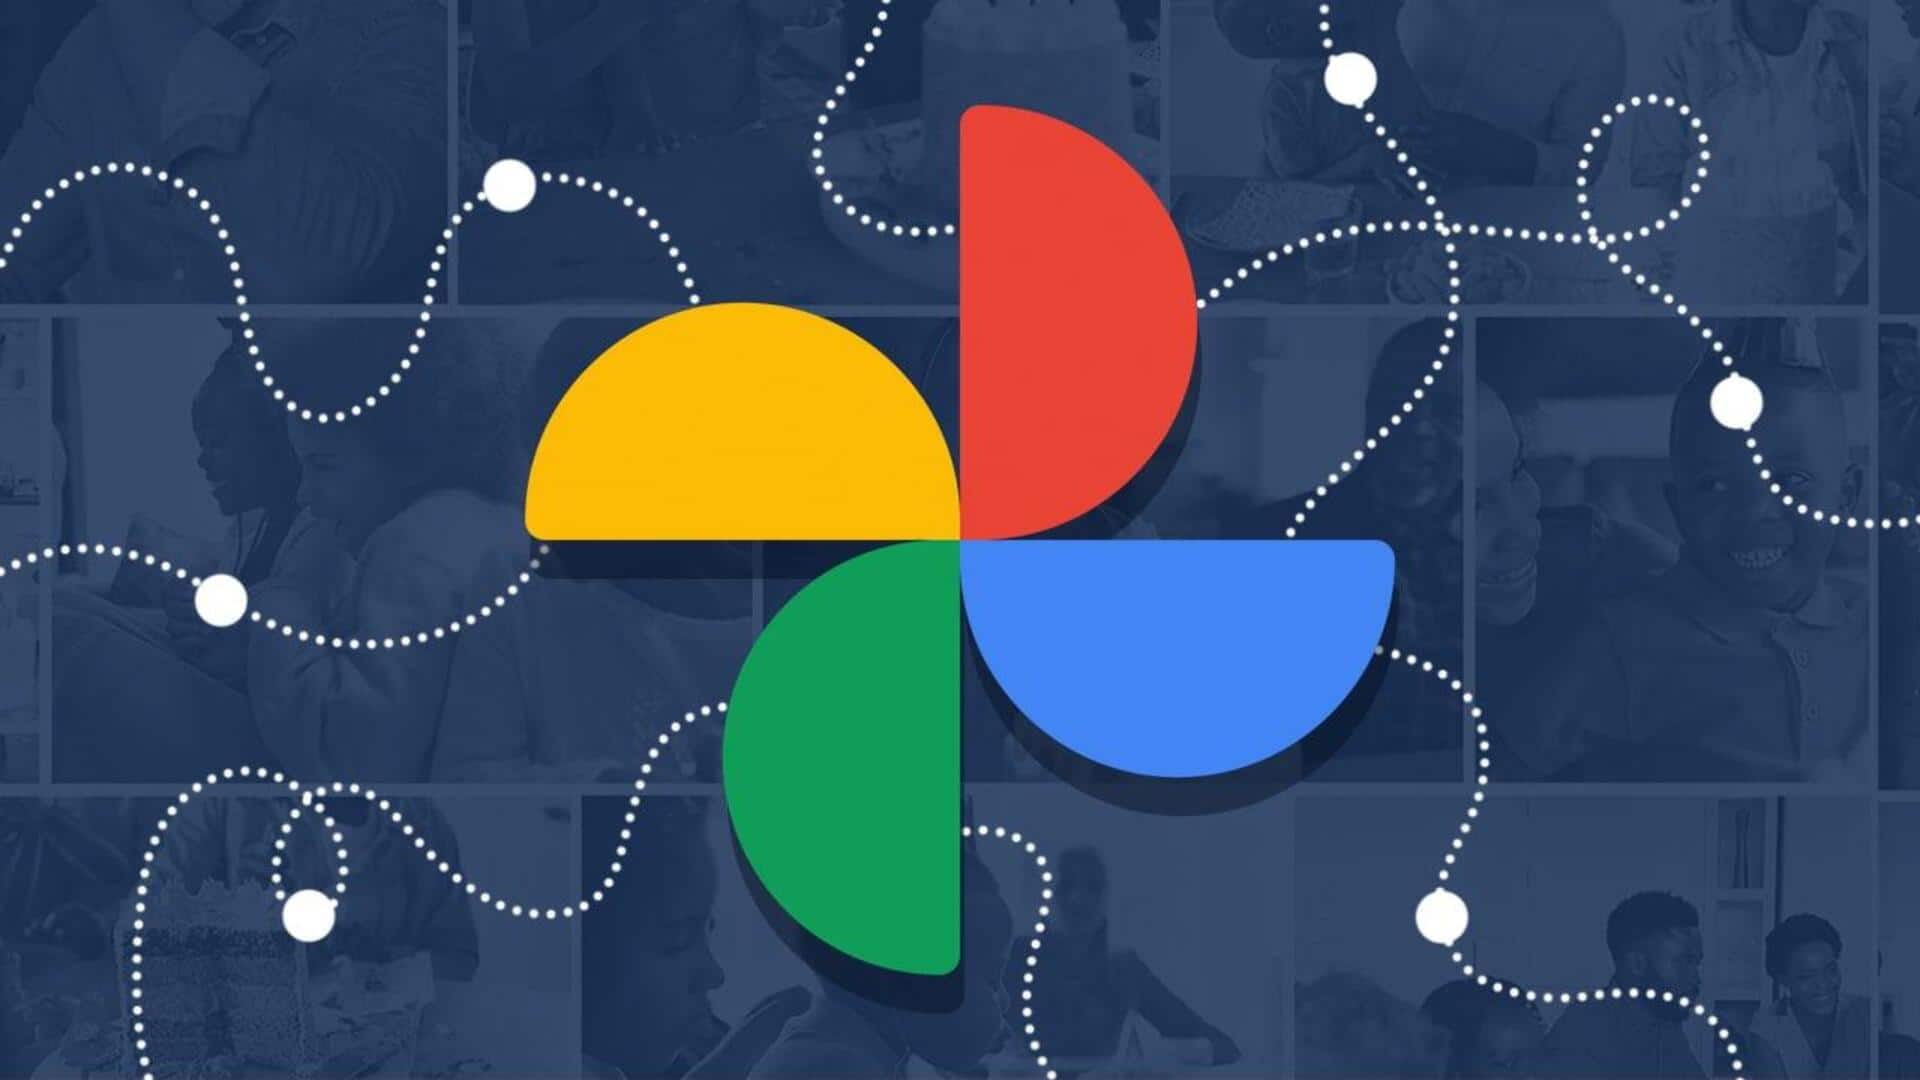 Google Photos to introduce 'Recover Storage' feature for Android users